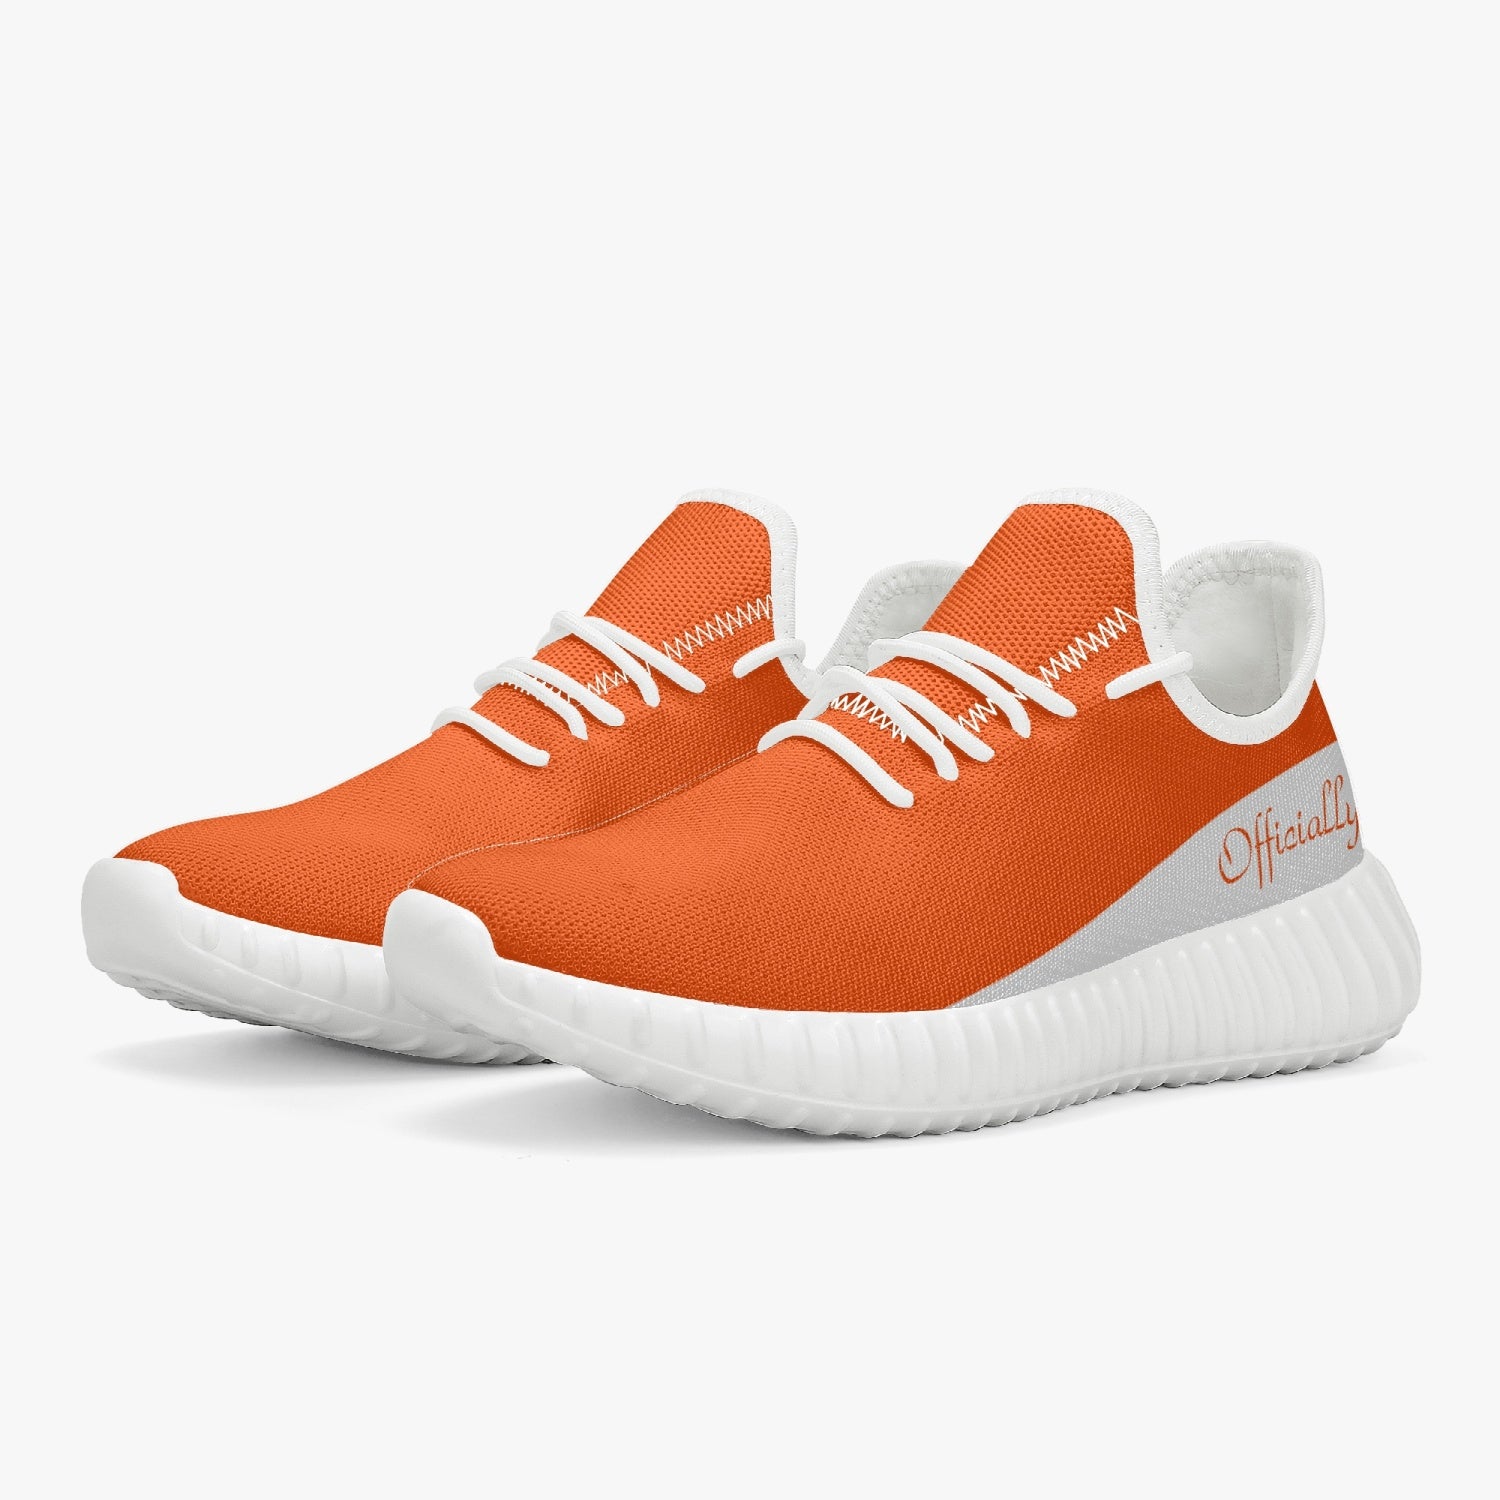 Officially Sexy Orange & White Laser Mesh Knit Sneakers - With White or Black Sole